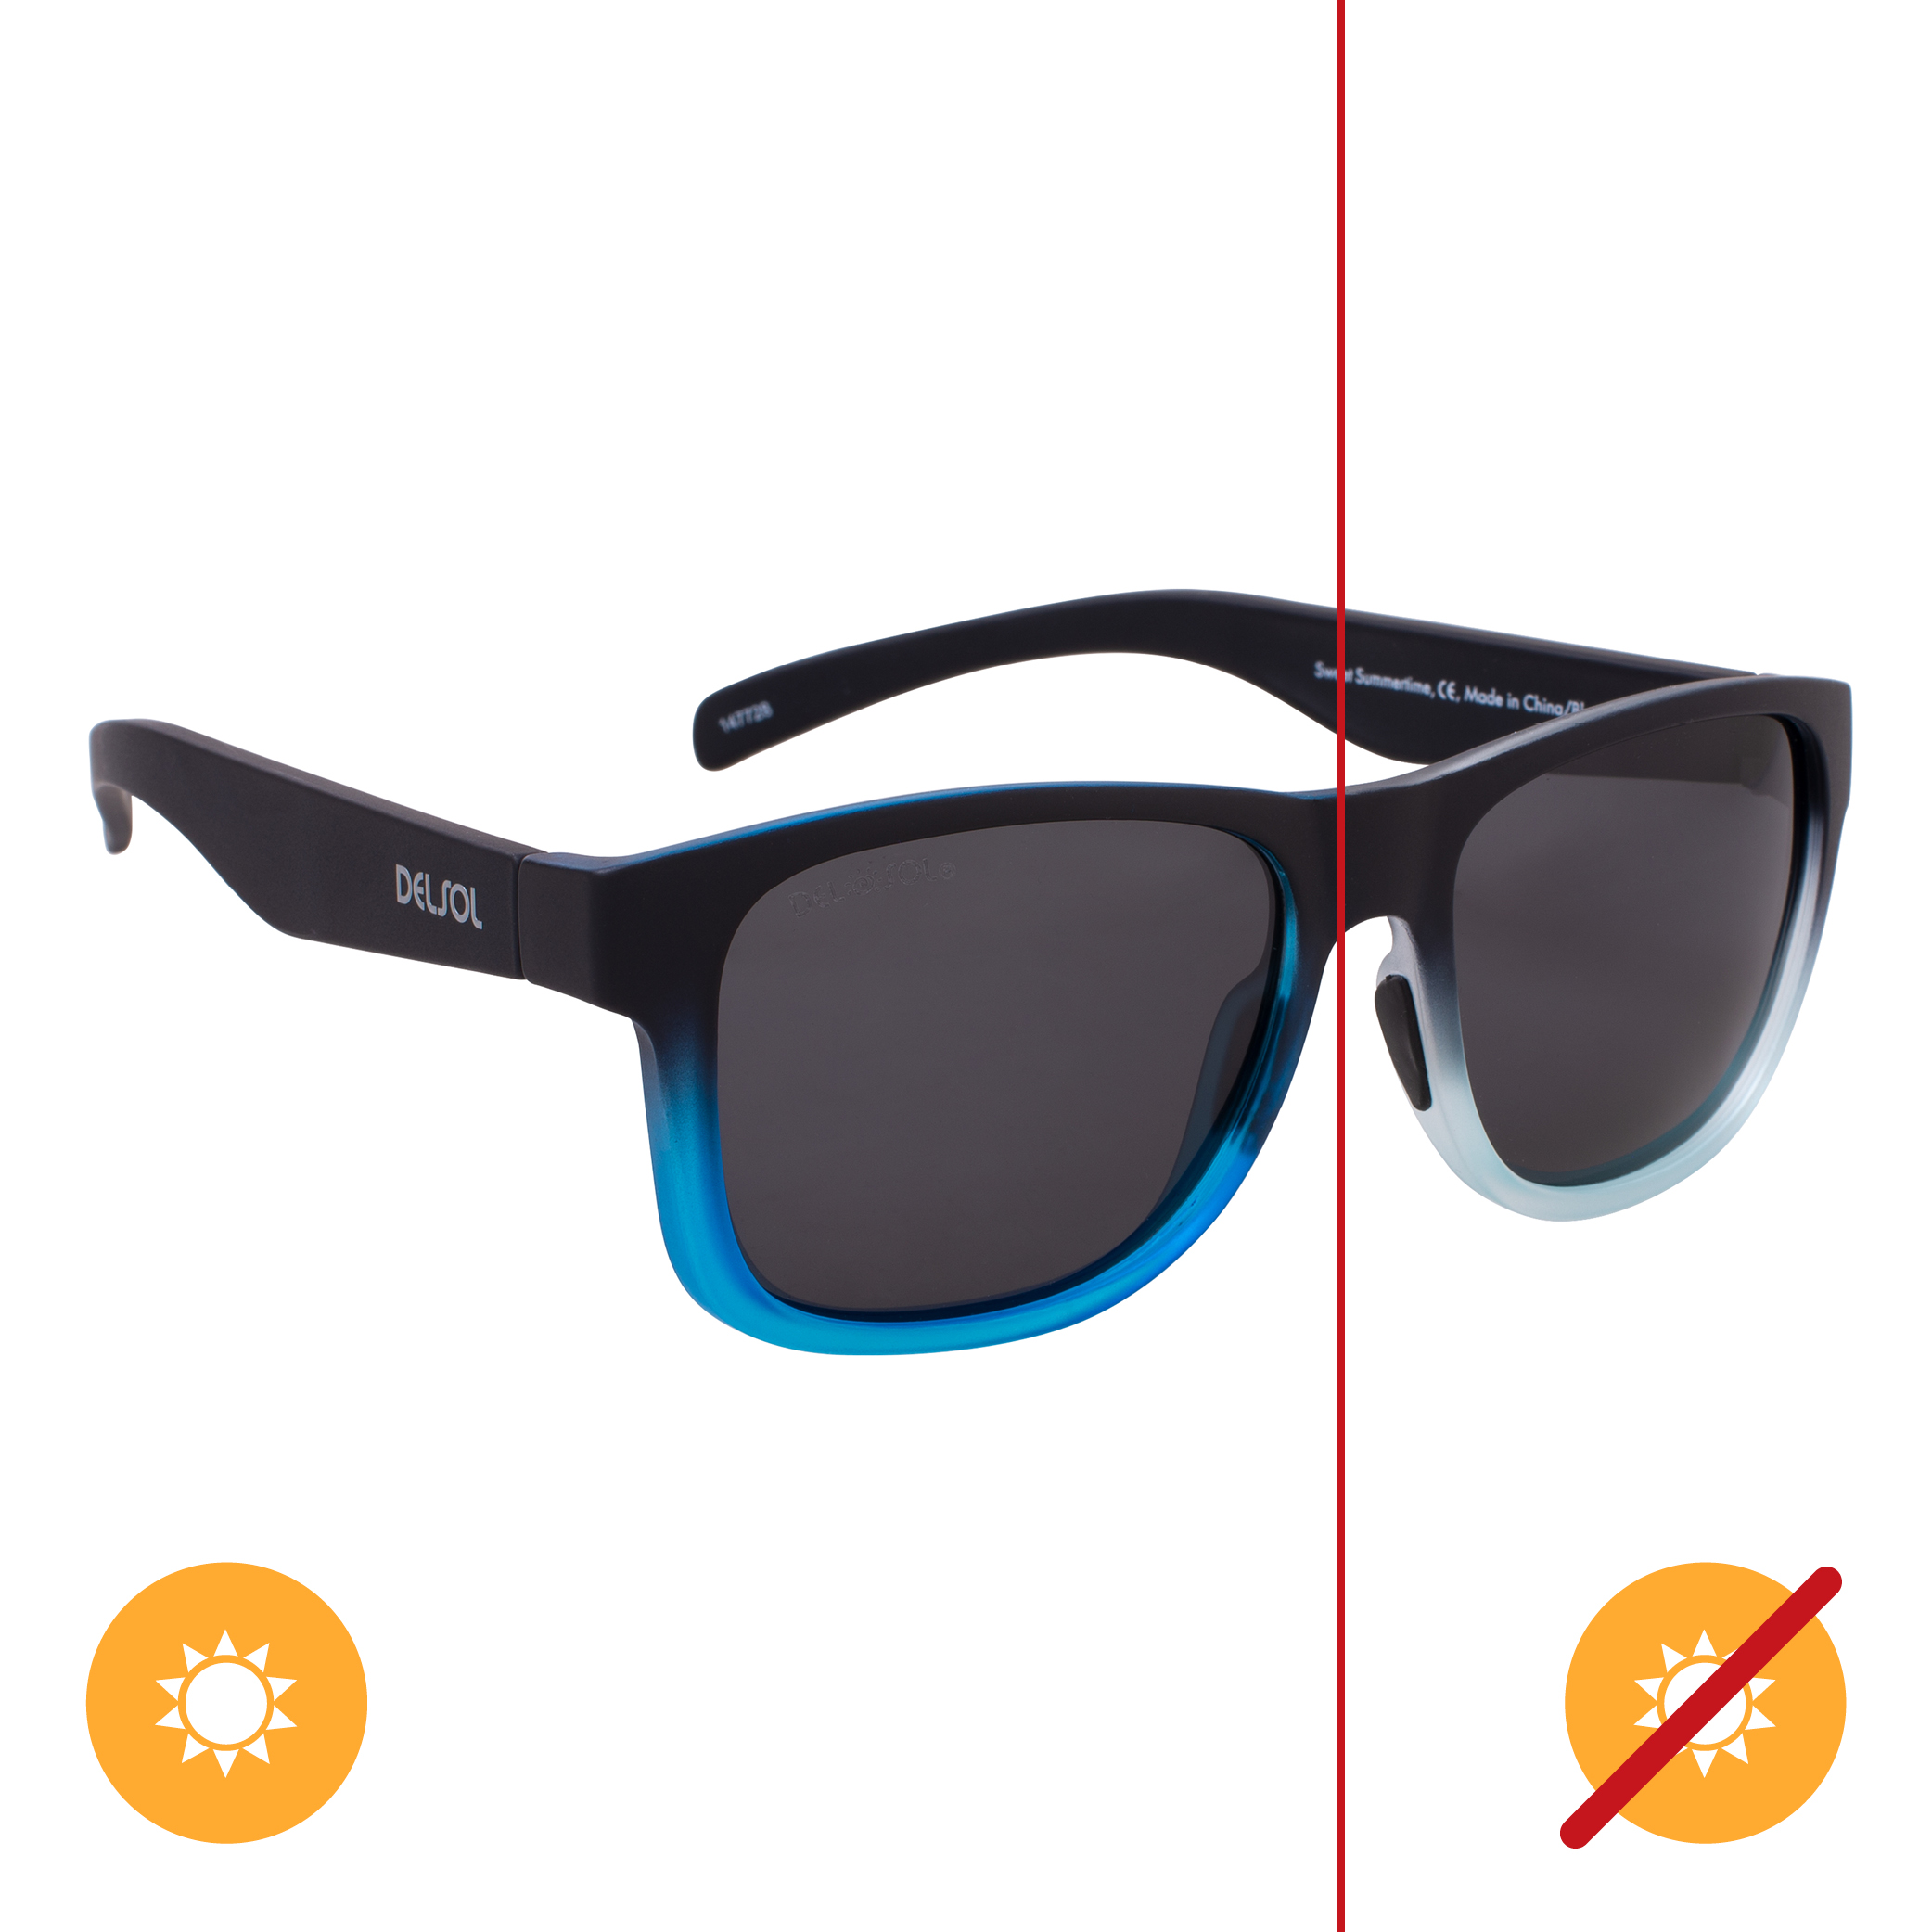 Del Sol Solize Sweet Summertime - Black and Light Blue to Blue for Unisex 1 Pc Sunglasses